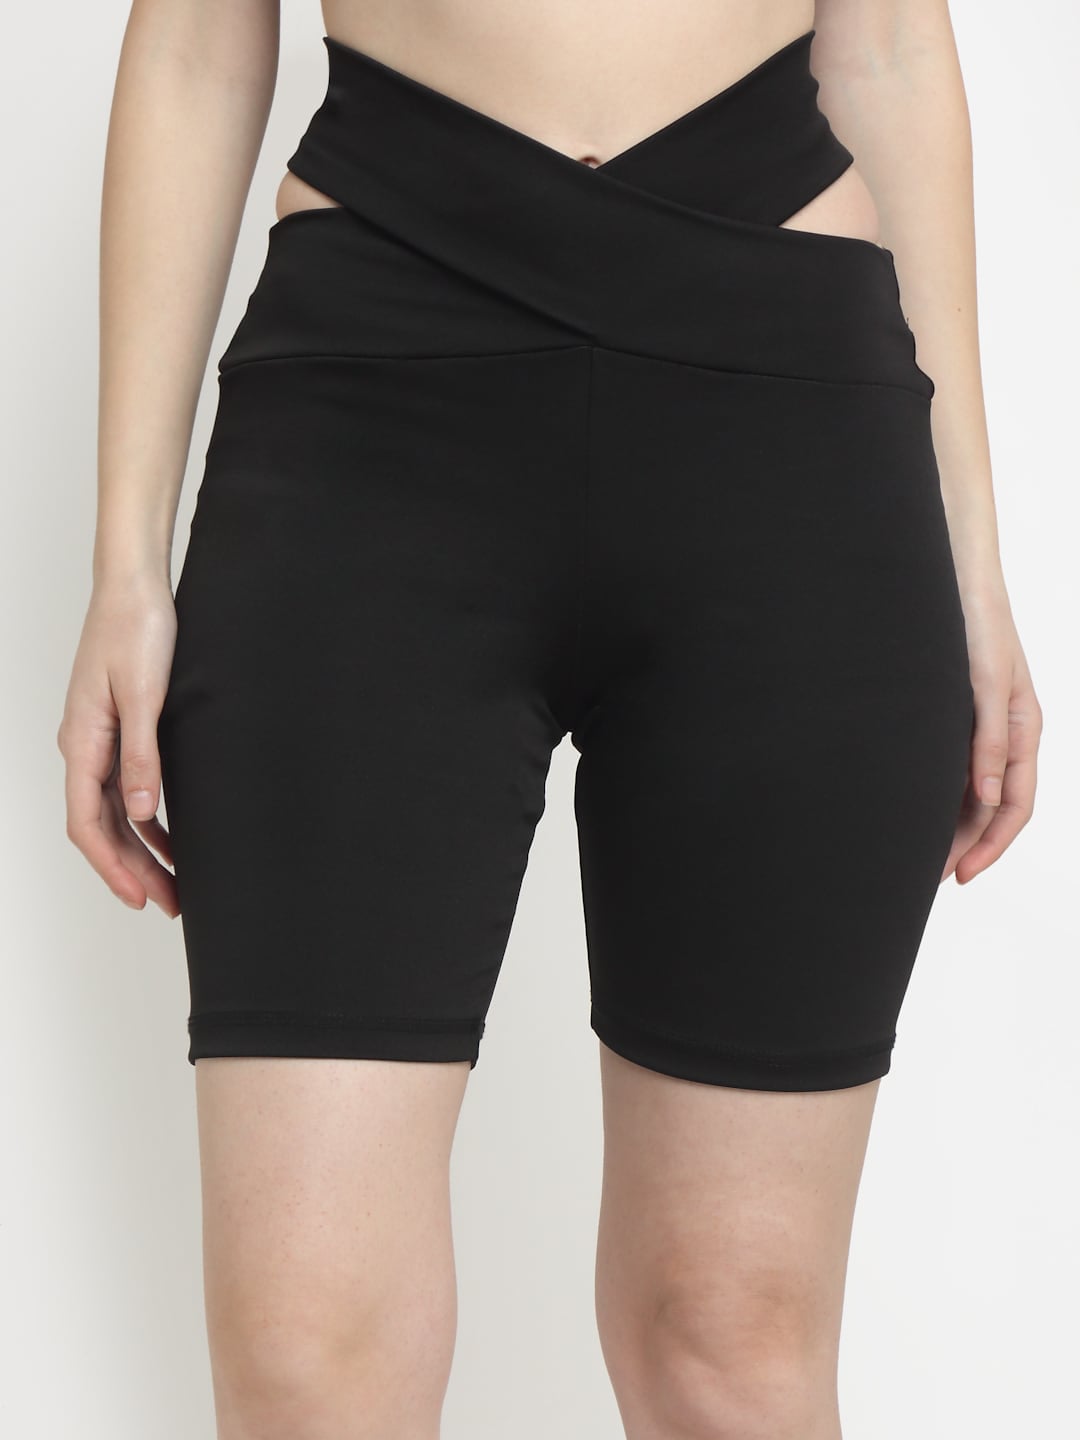 EVERDION Women Black Slim Fit High-Rise Rapid Dry Training or Gym Cycling Shorts Price in India